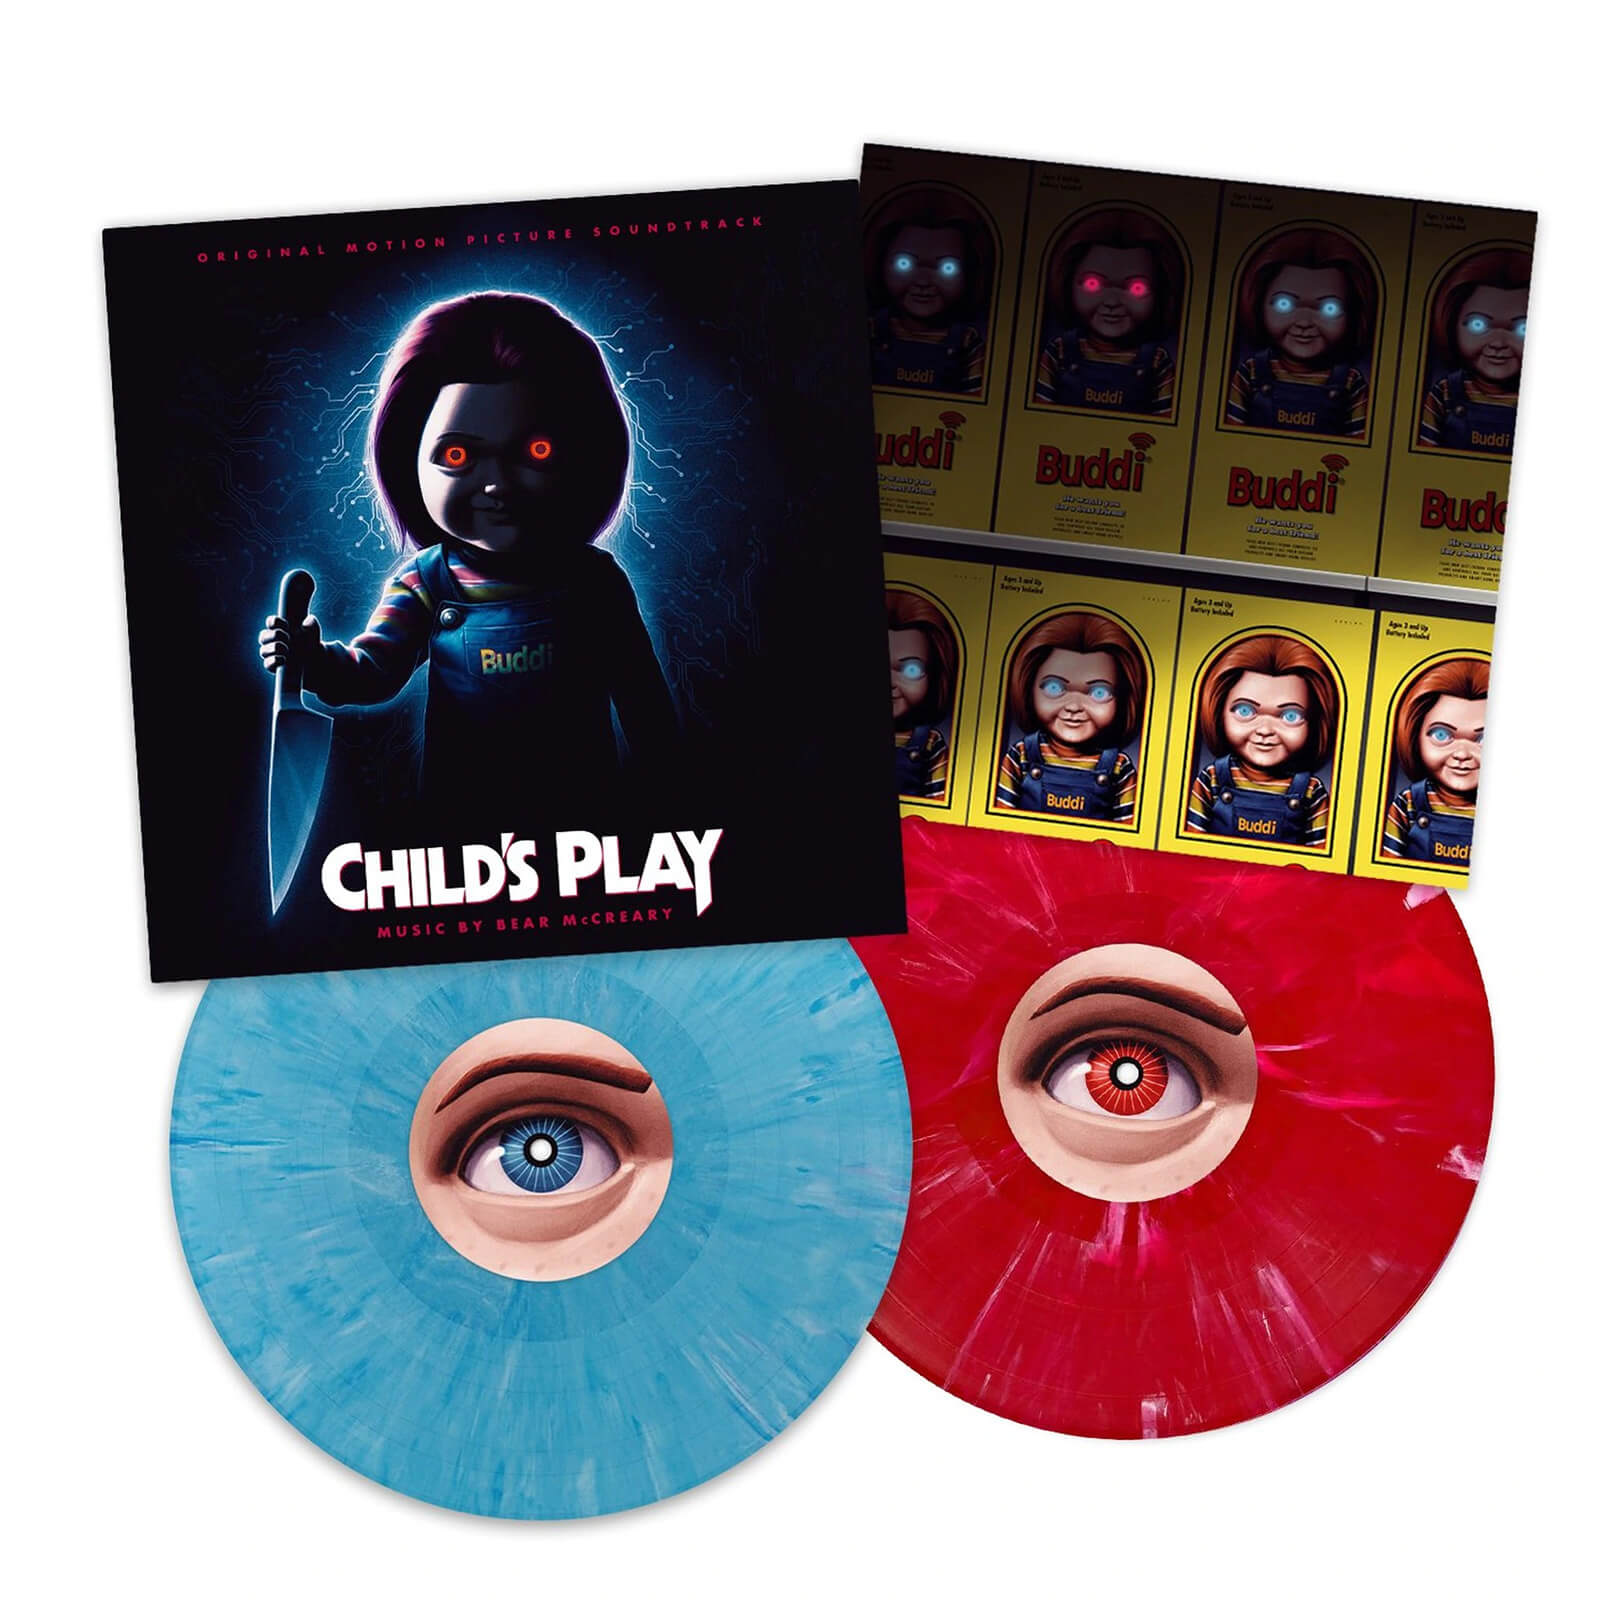 Waxwork Childs Play 2019 2x Colour Lp - kid sings fnaf song roblox id